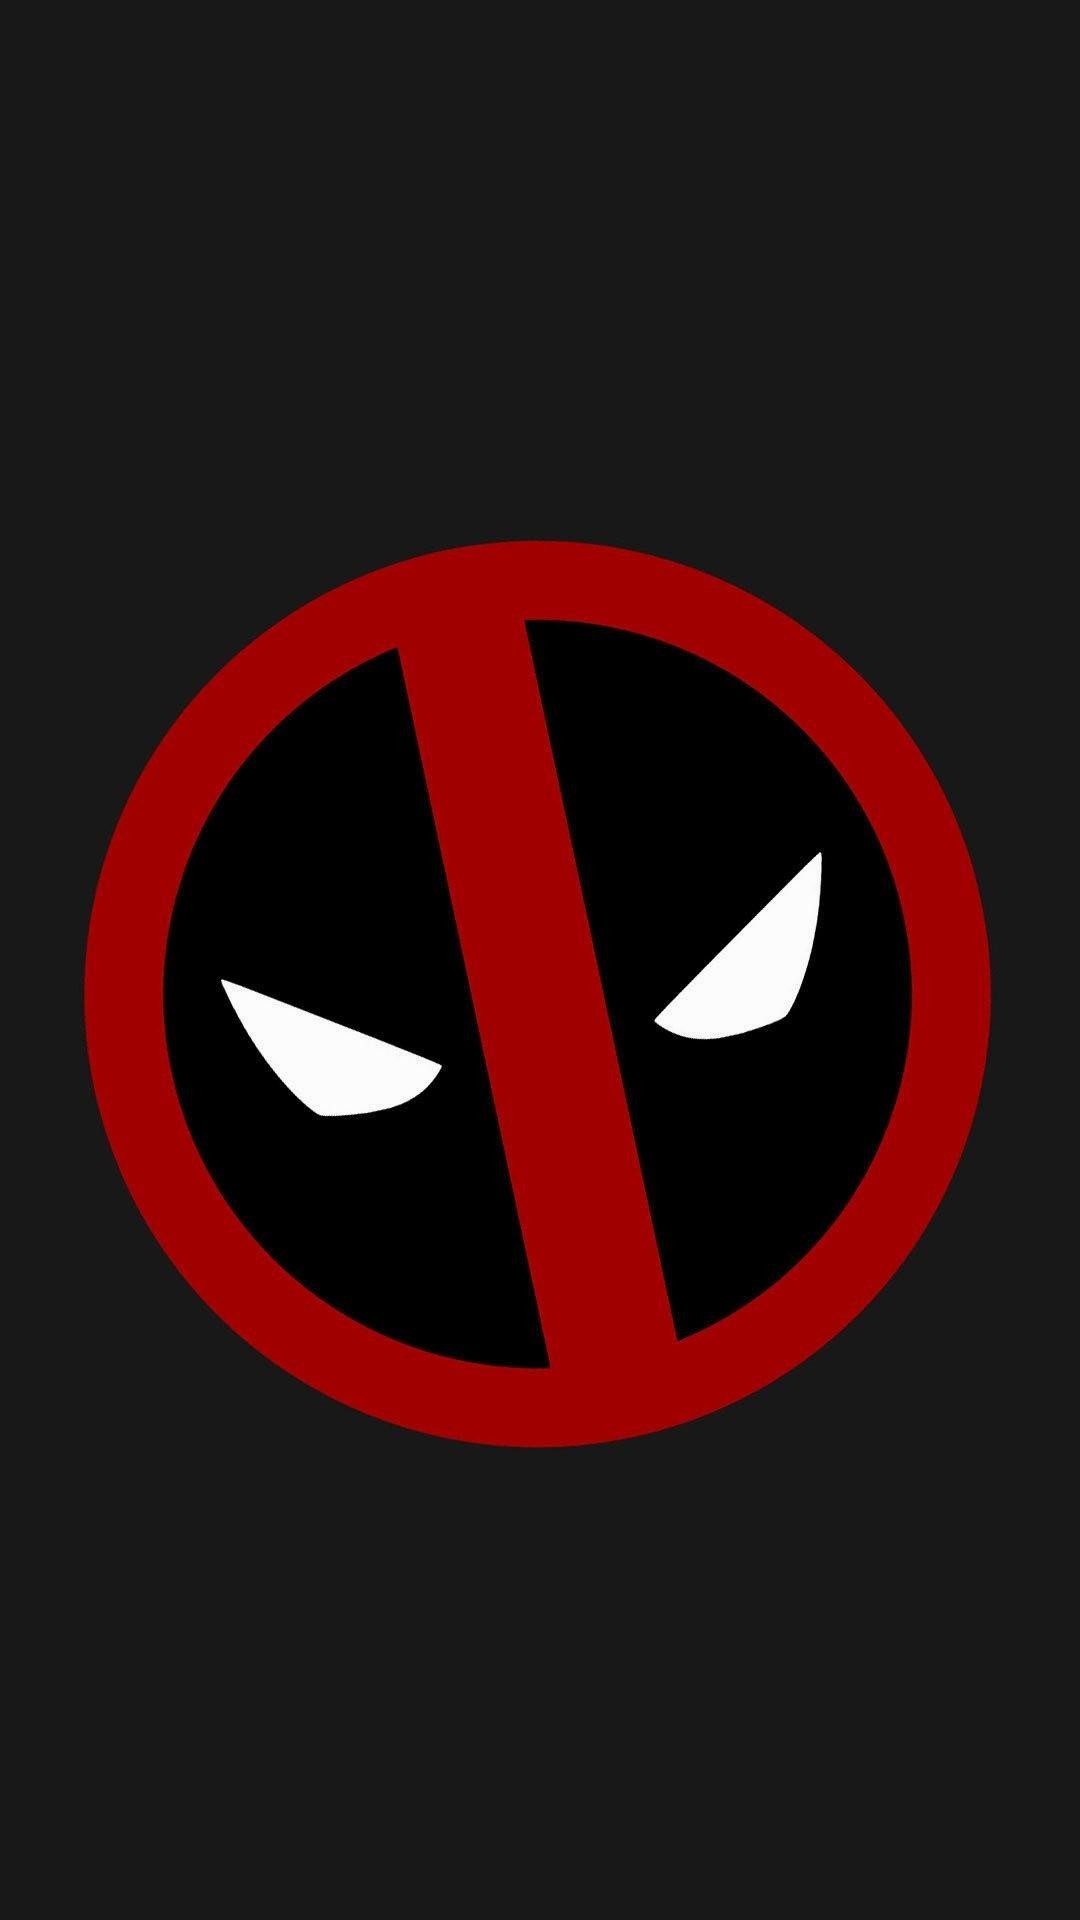 1080x1920 wallpaper.wiki-Free-Deadpool-Iphone-Image-Download-PIC-